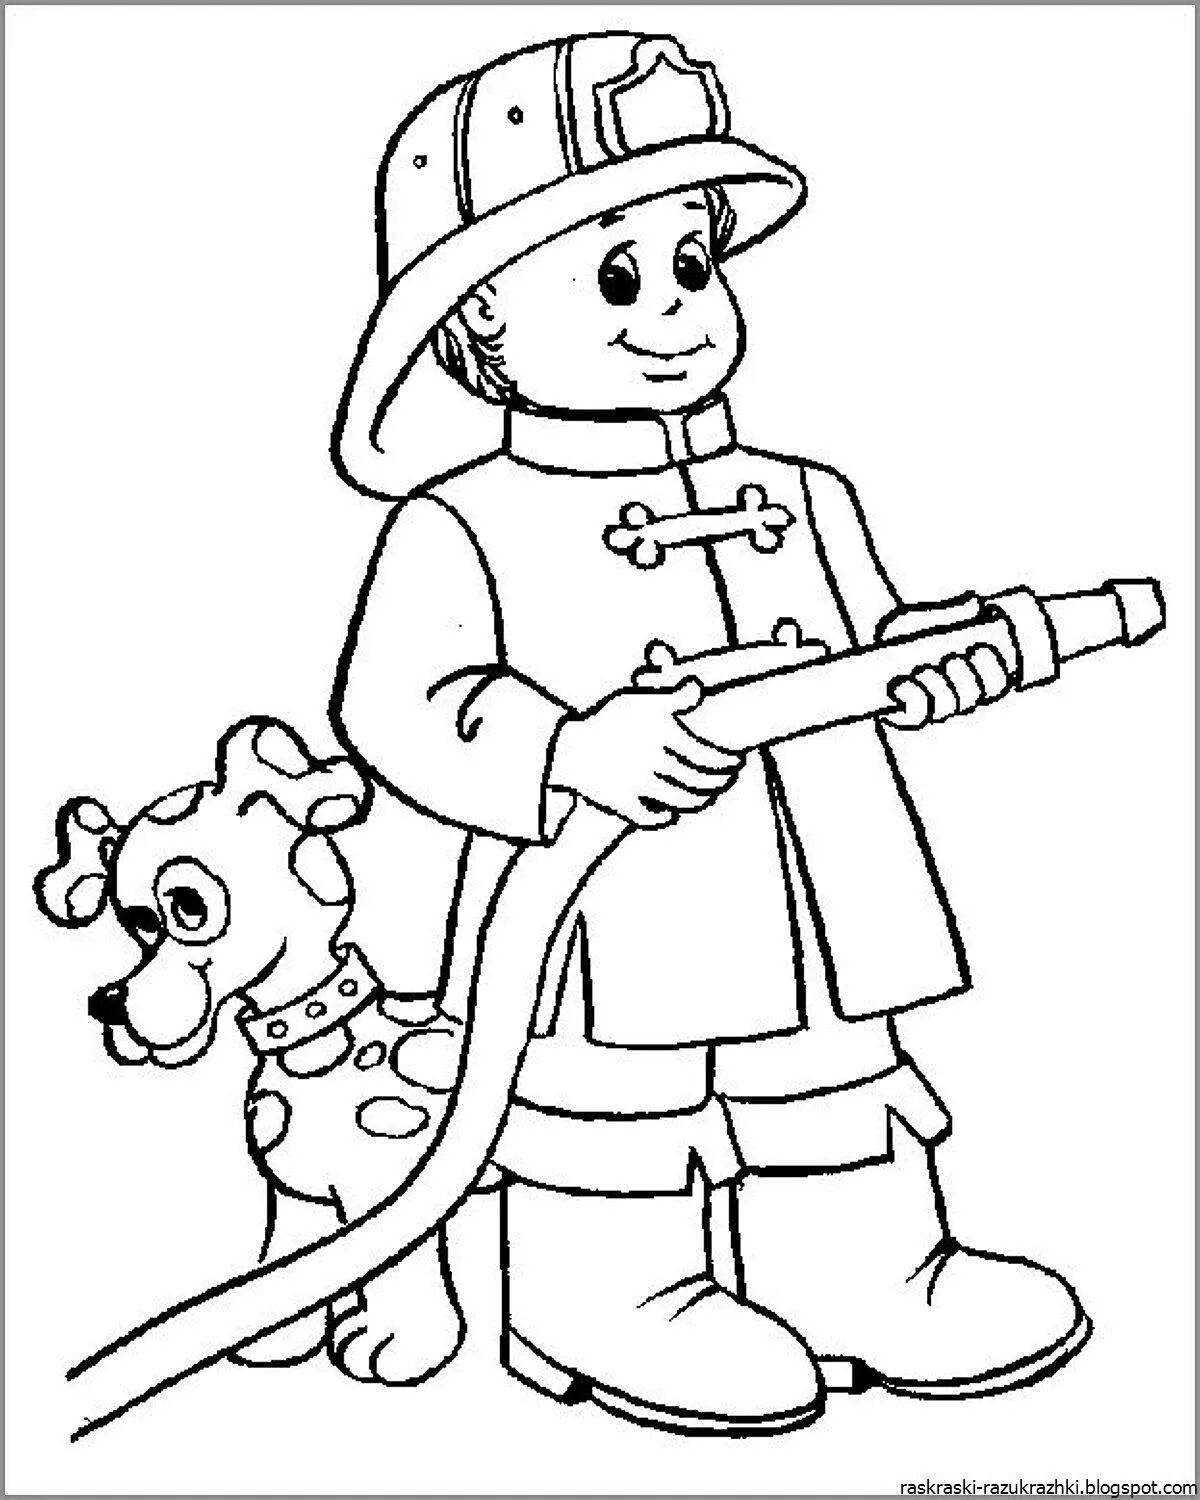 Fabulous engineer coloring page